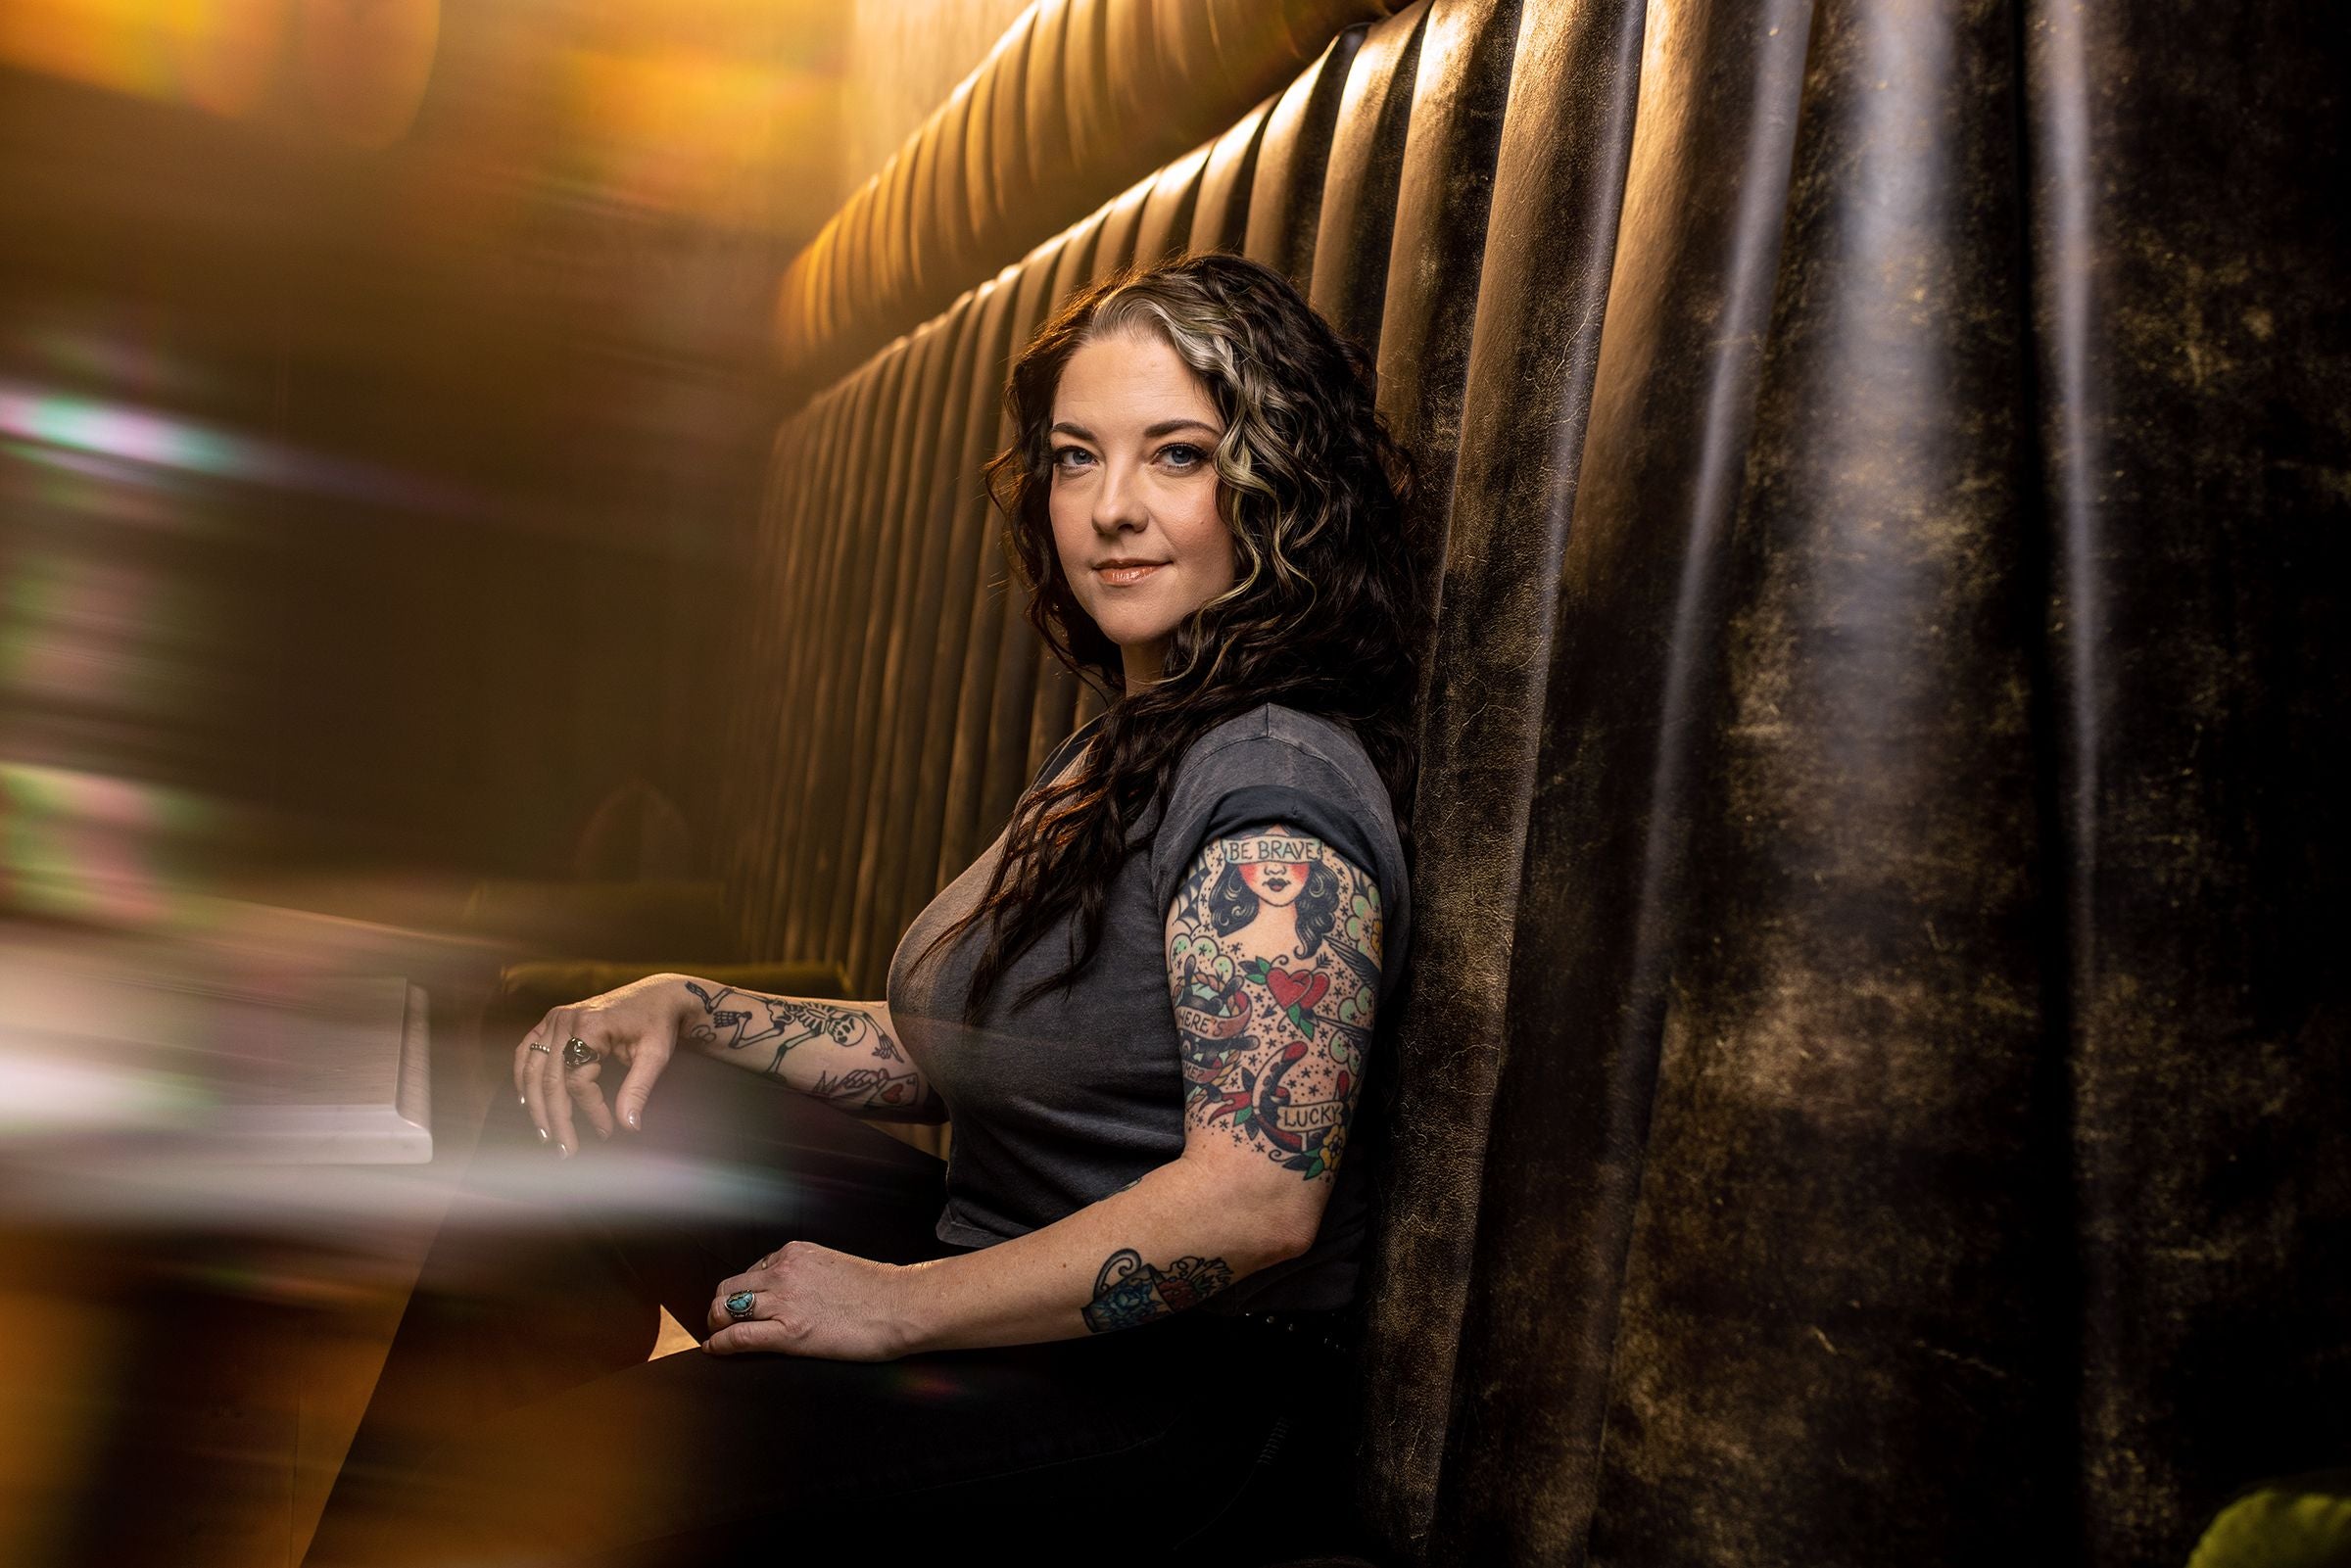 Ashley McBryde: The Devil I Know Tour free pre-sale password for early tickets in St. Louis